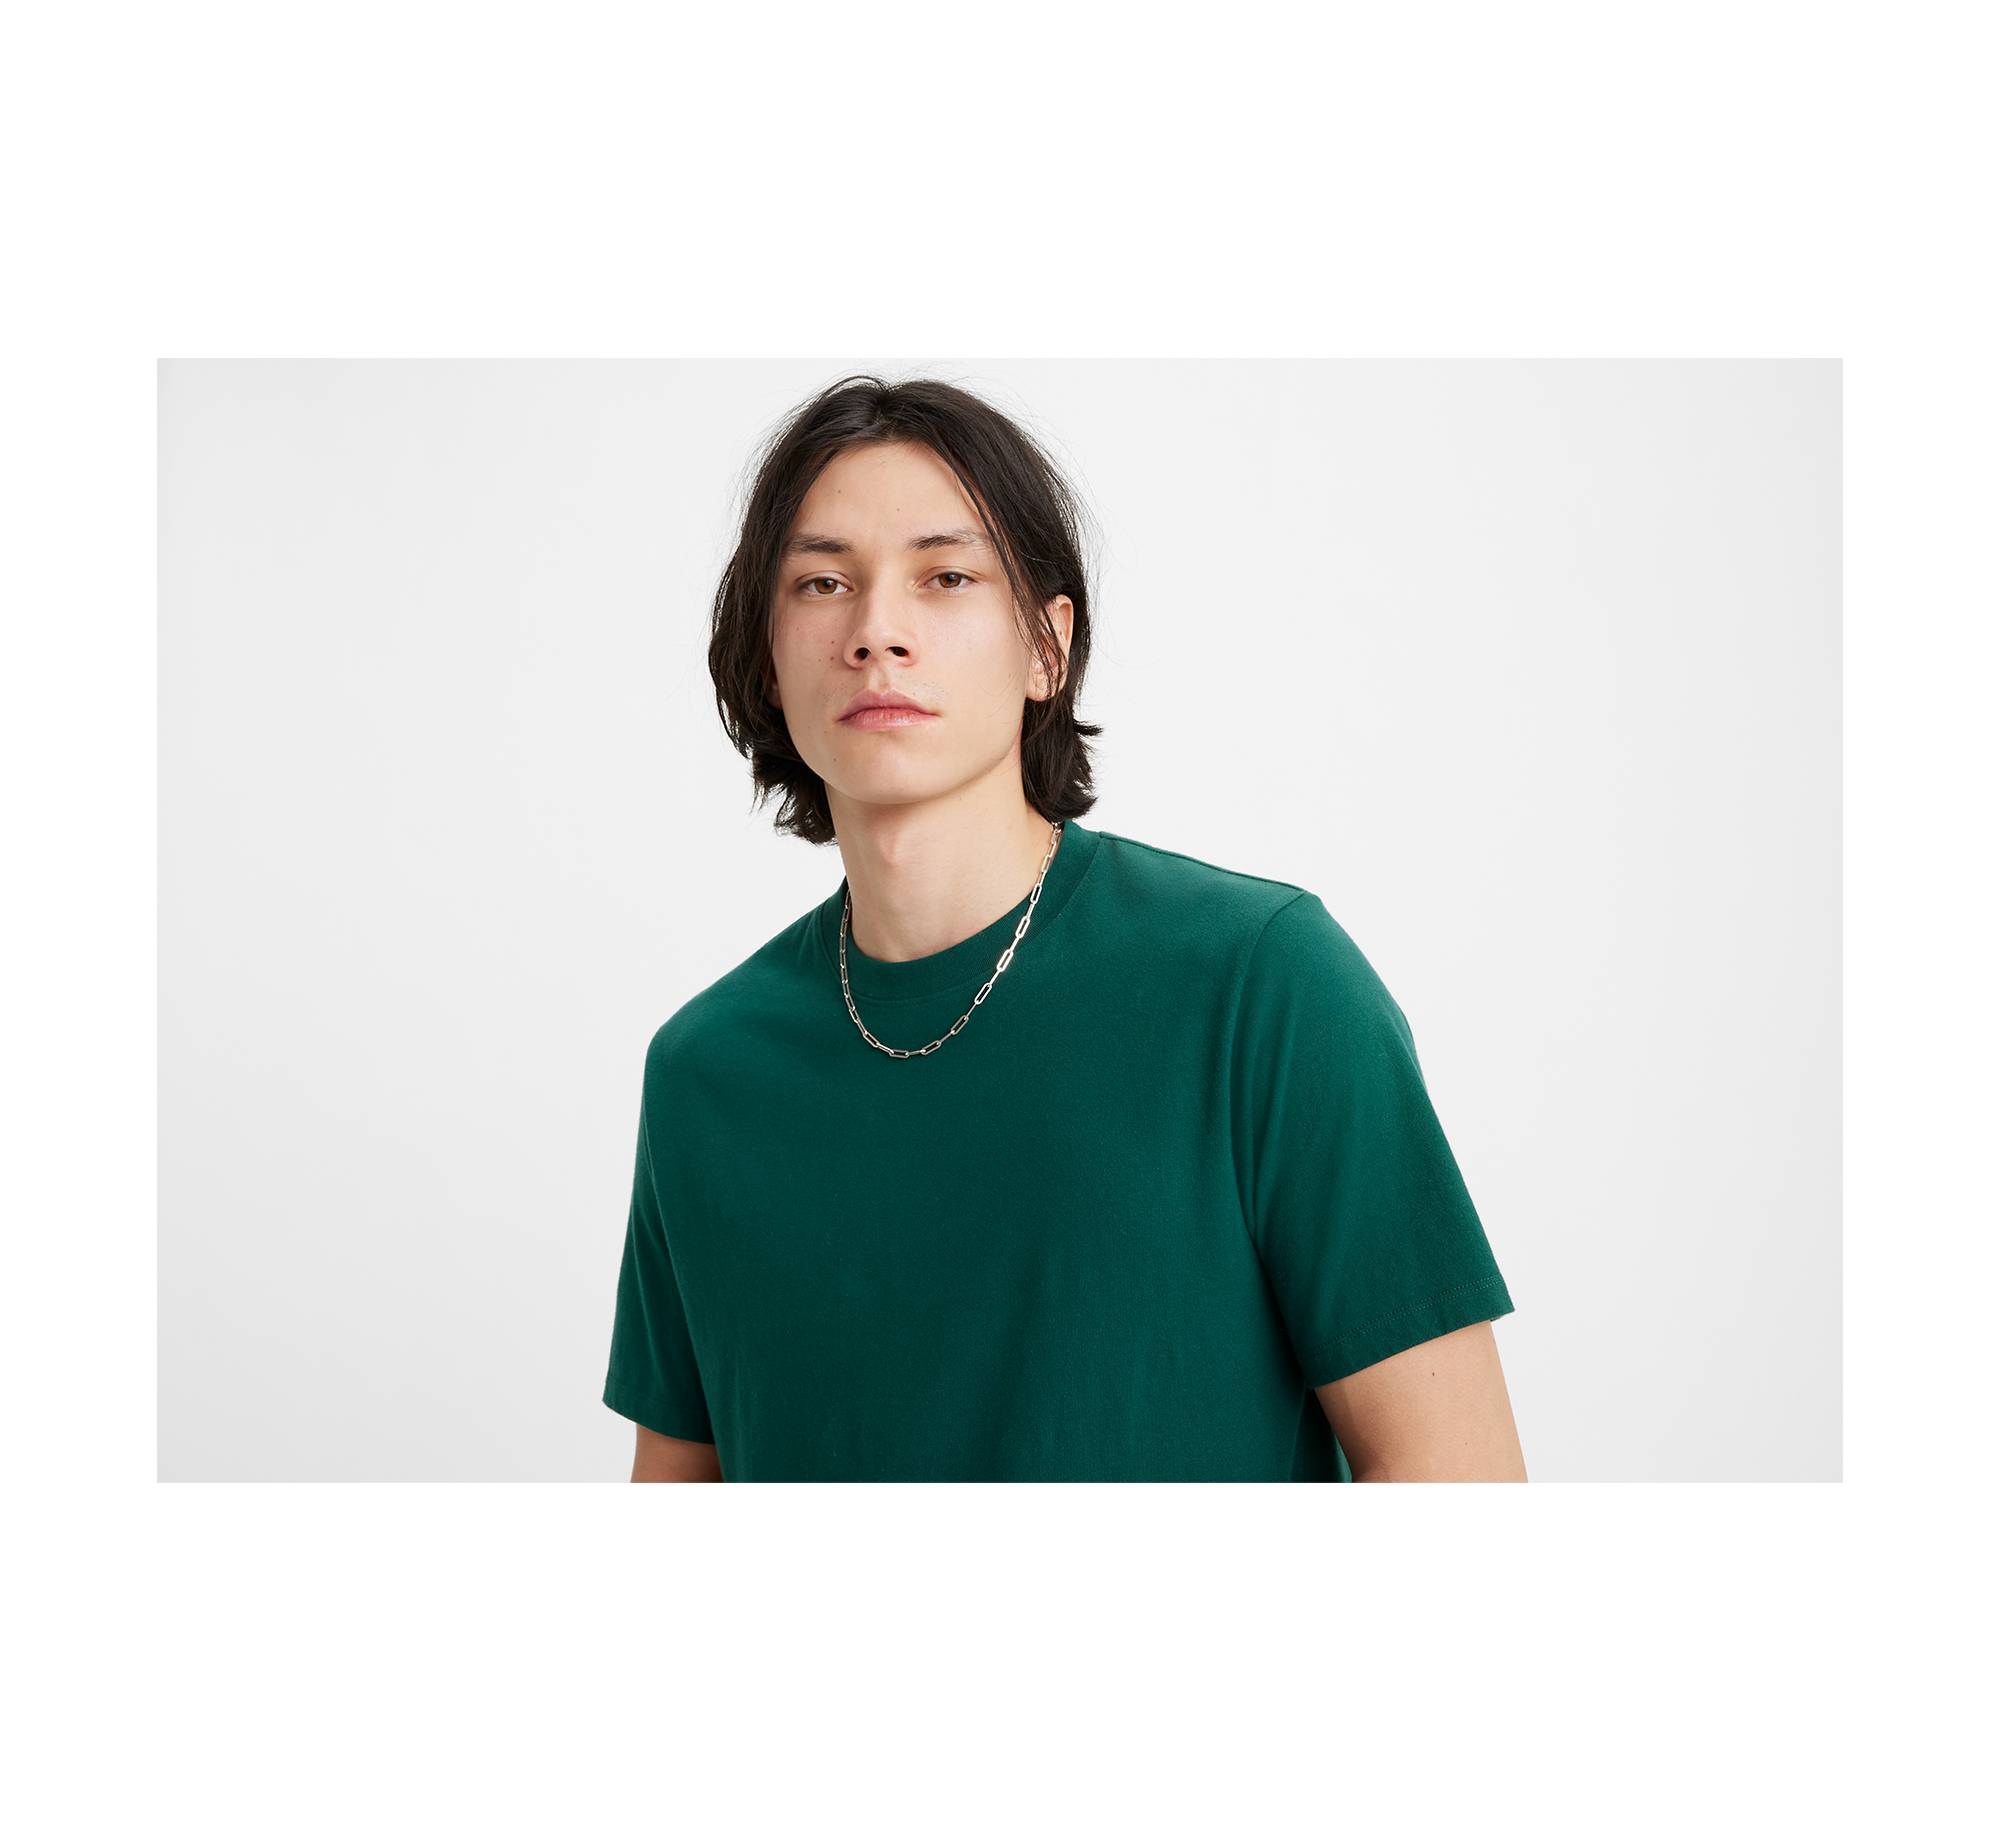 The Essential T-shirt - Green | Levi's® US